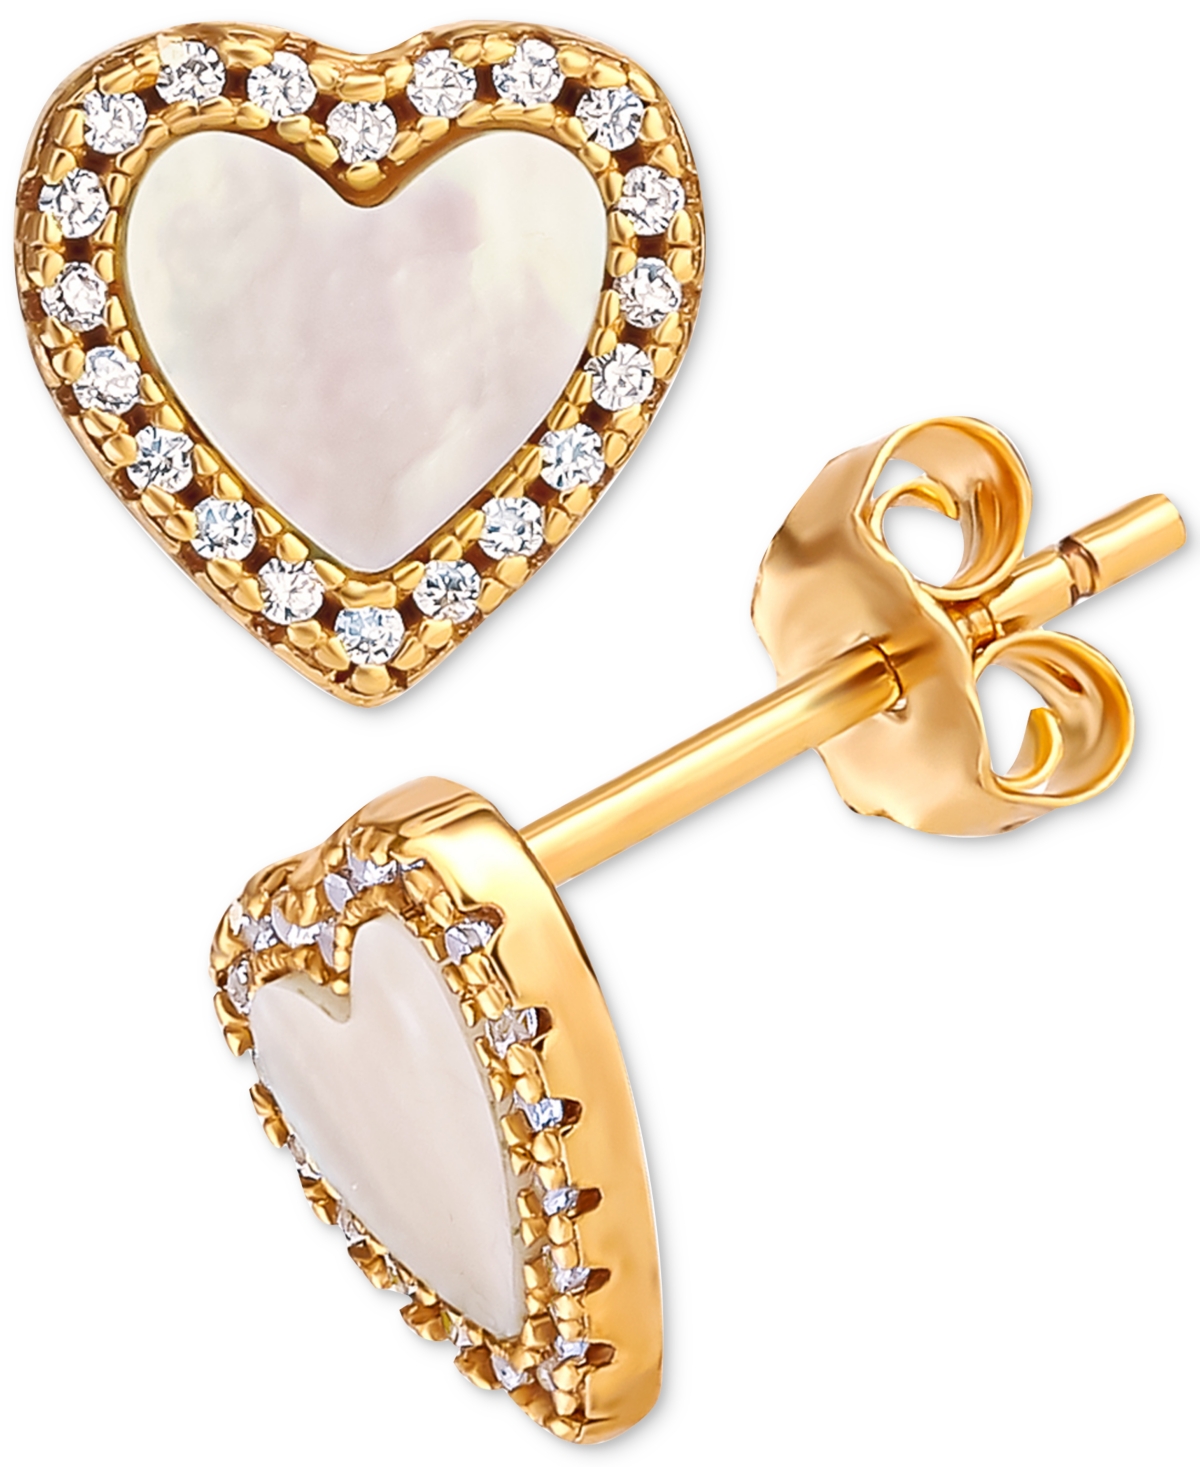 Giani Bernini Mother Of Pearl & Cubic Zirconia Heart Stud Earrings In 18k Gold-plated Sterling Silver, Created For